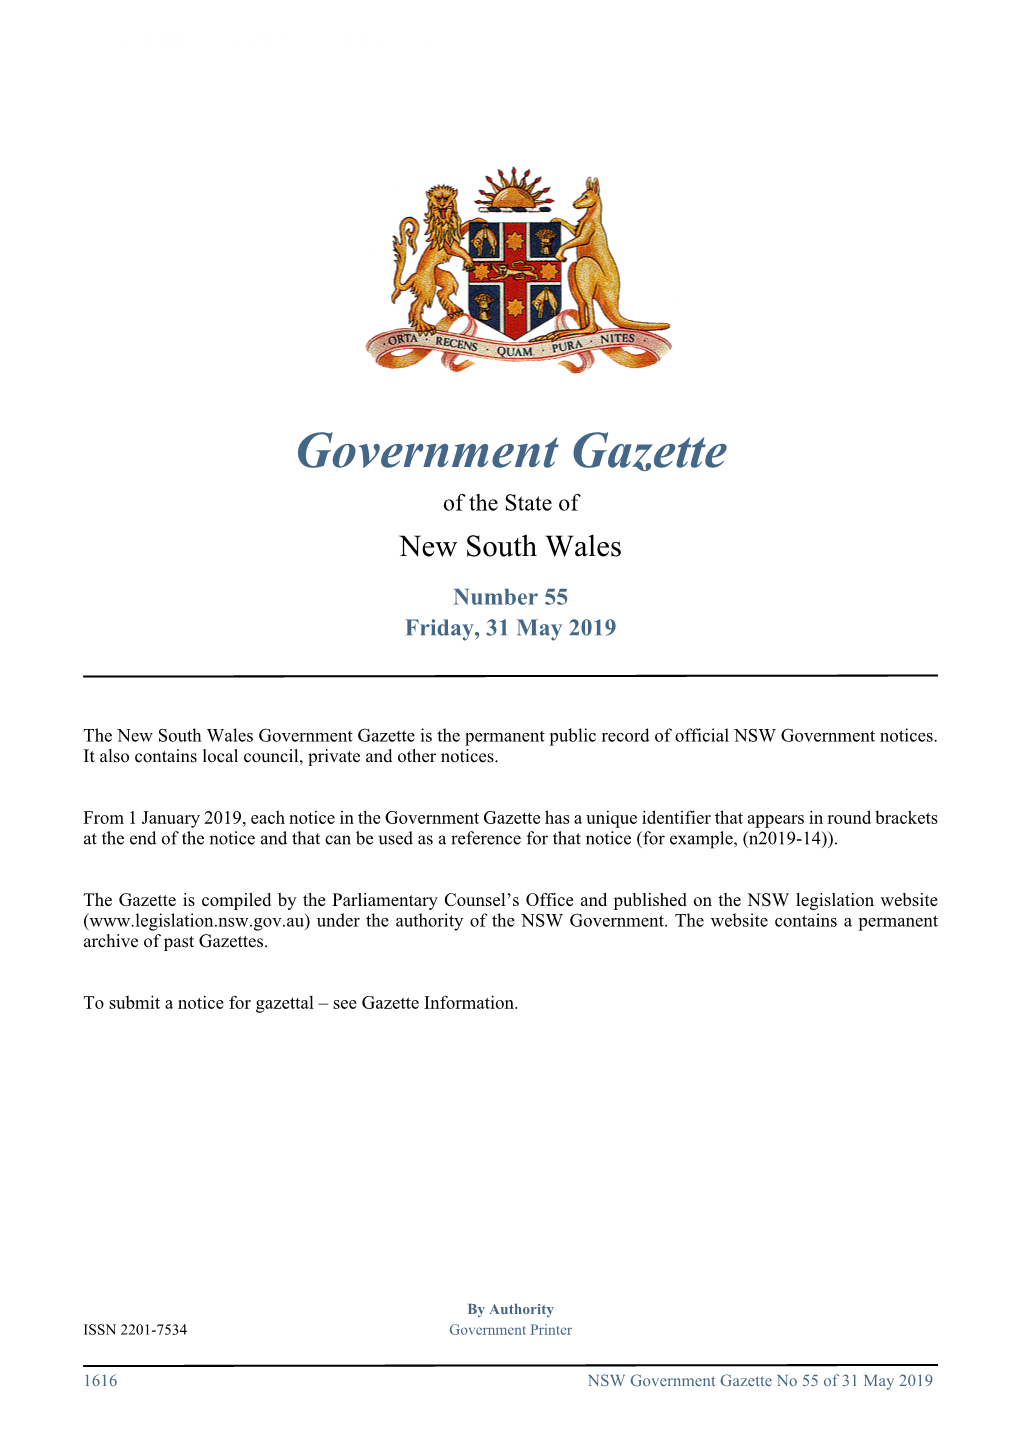 Government Gazette No 55 of Friday 31 May 2019